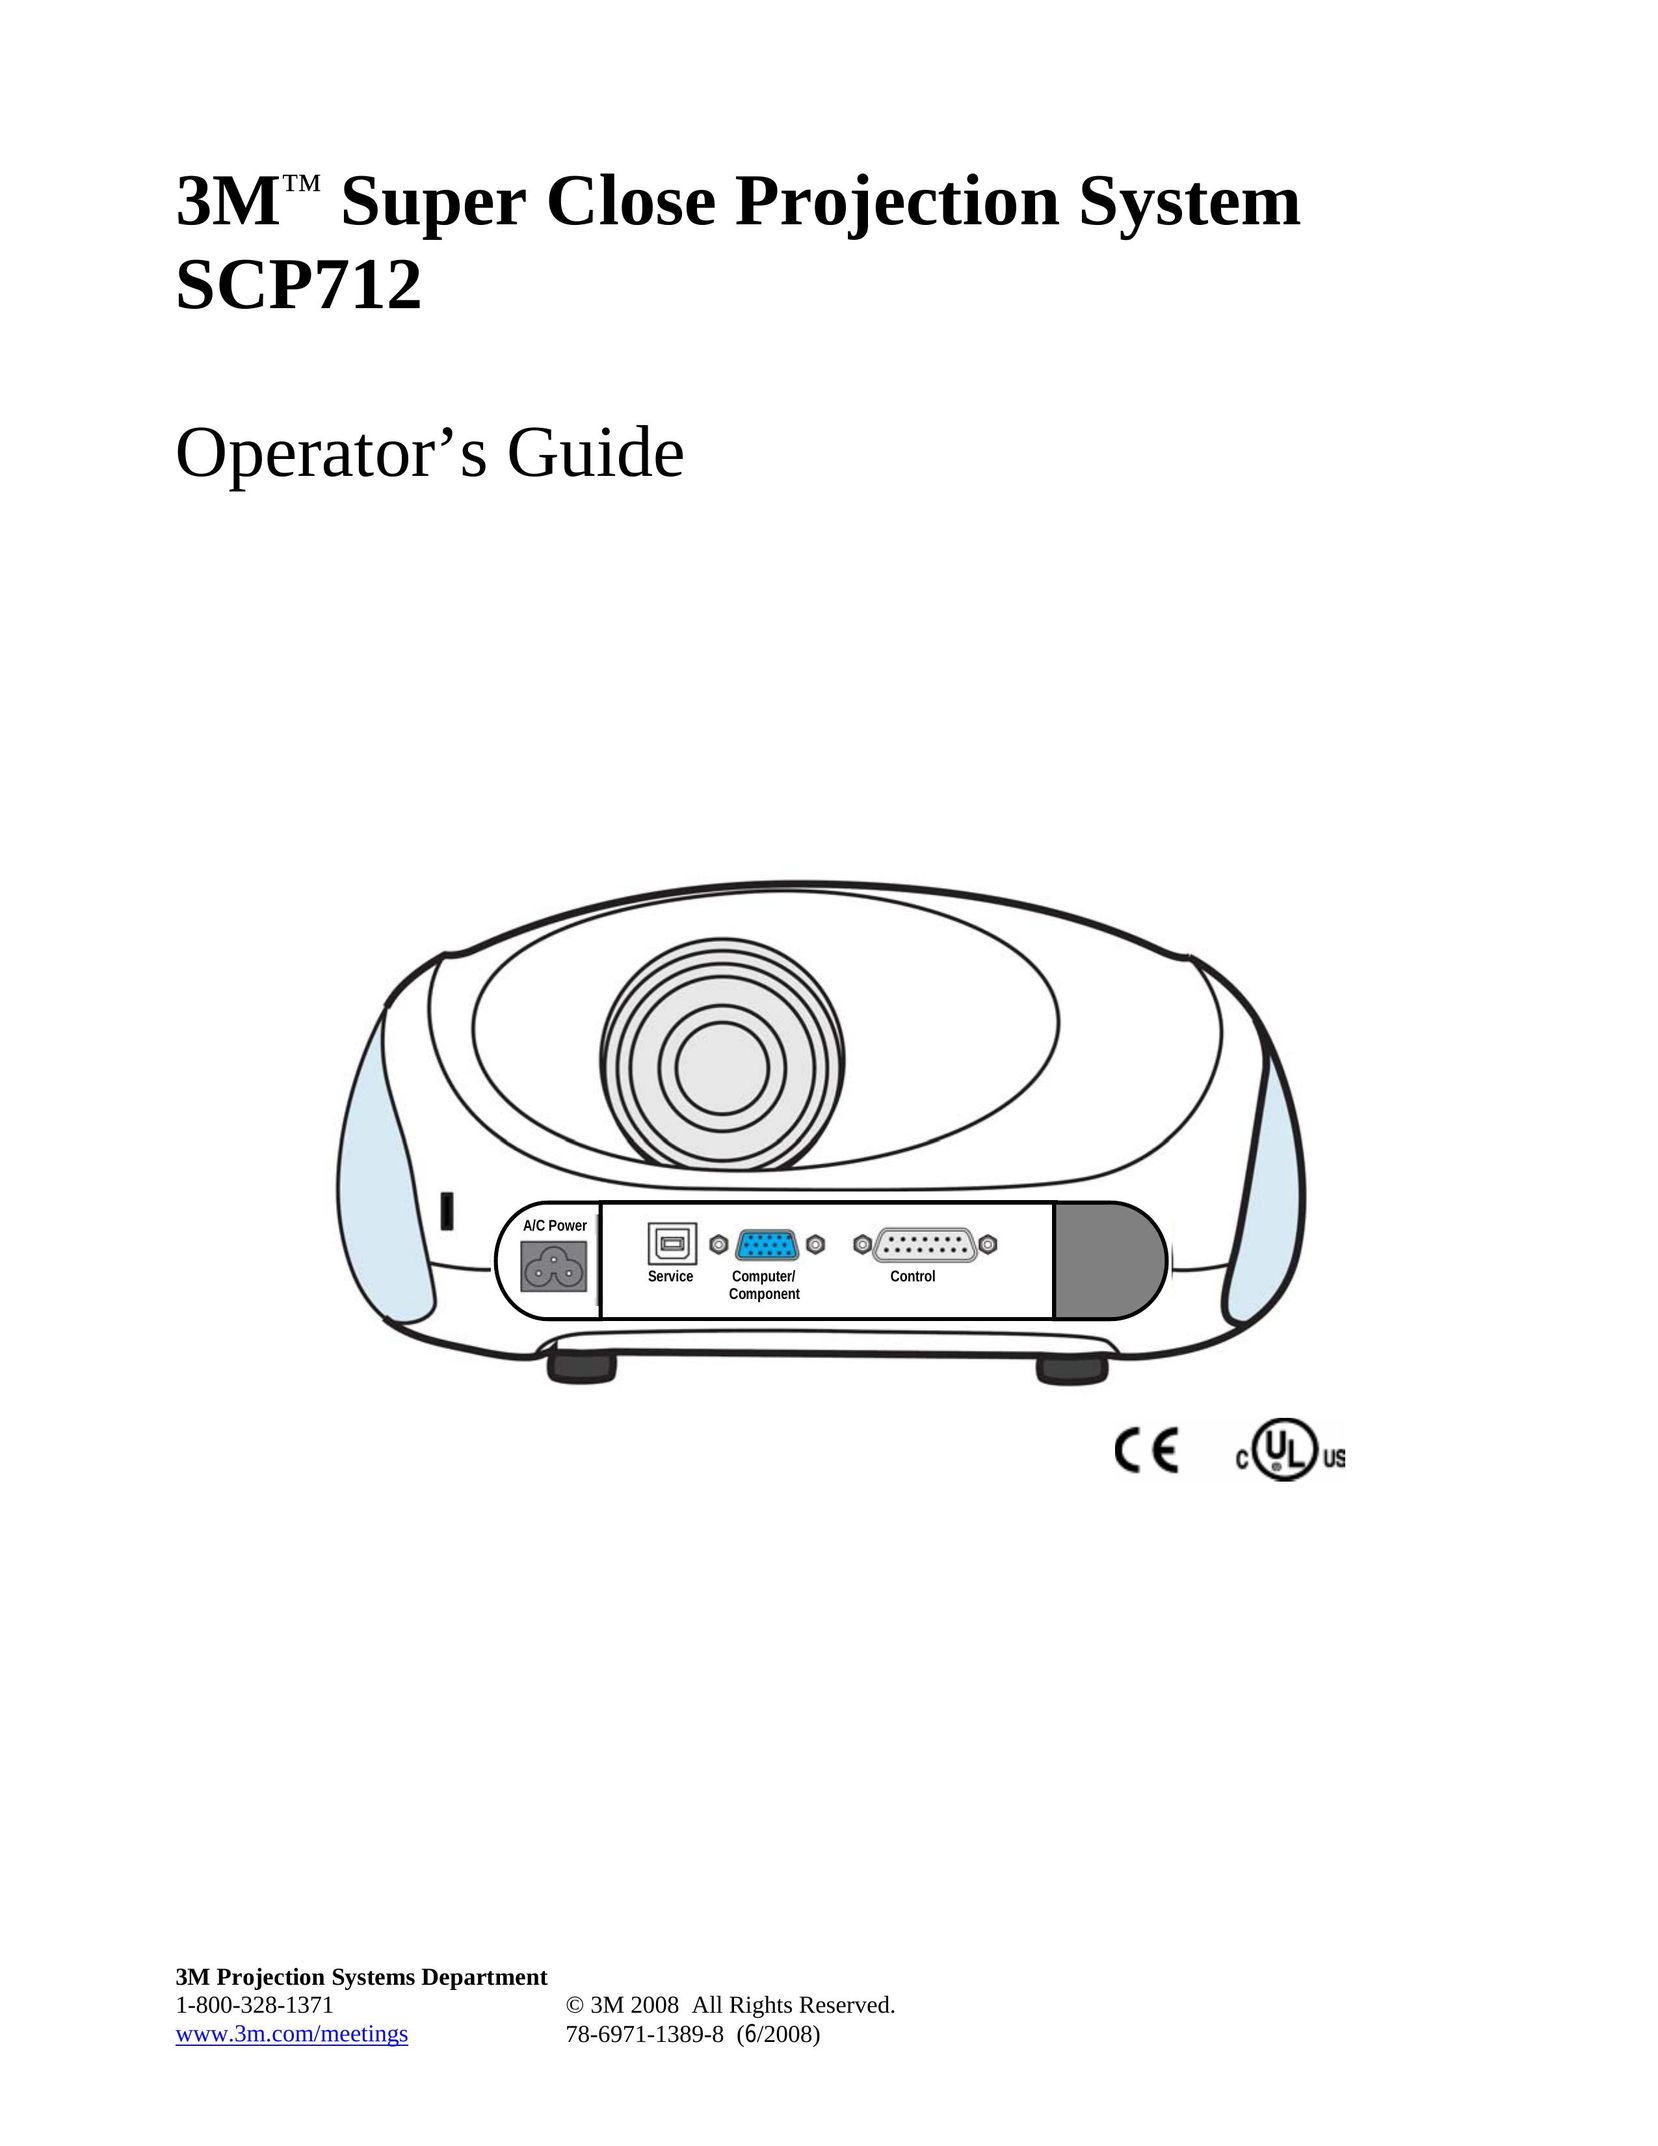 3M SCP7112 Home Theater System User Manual